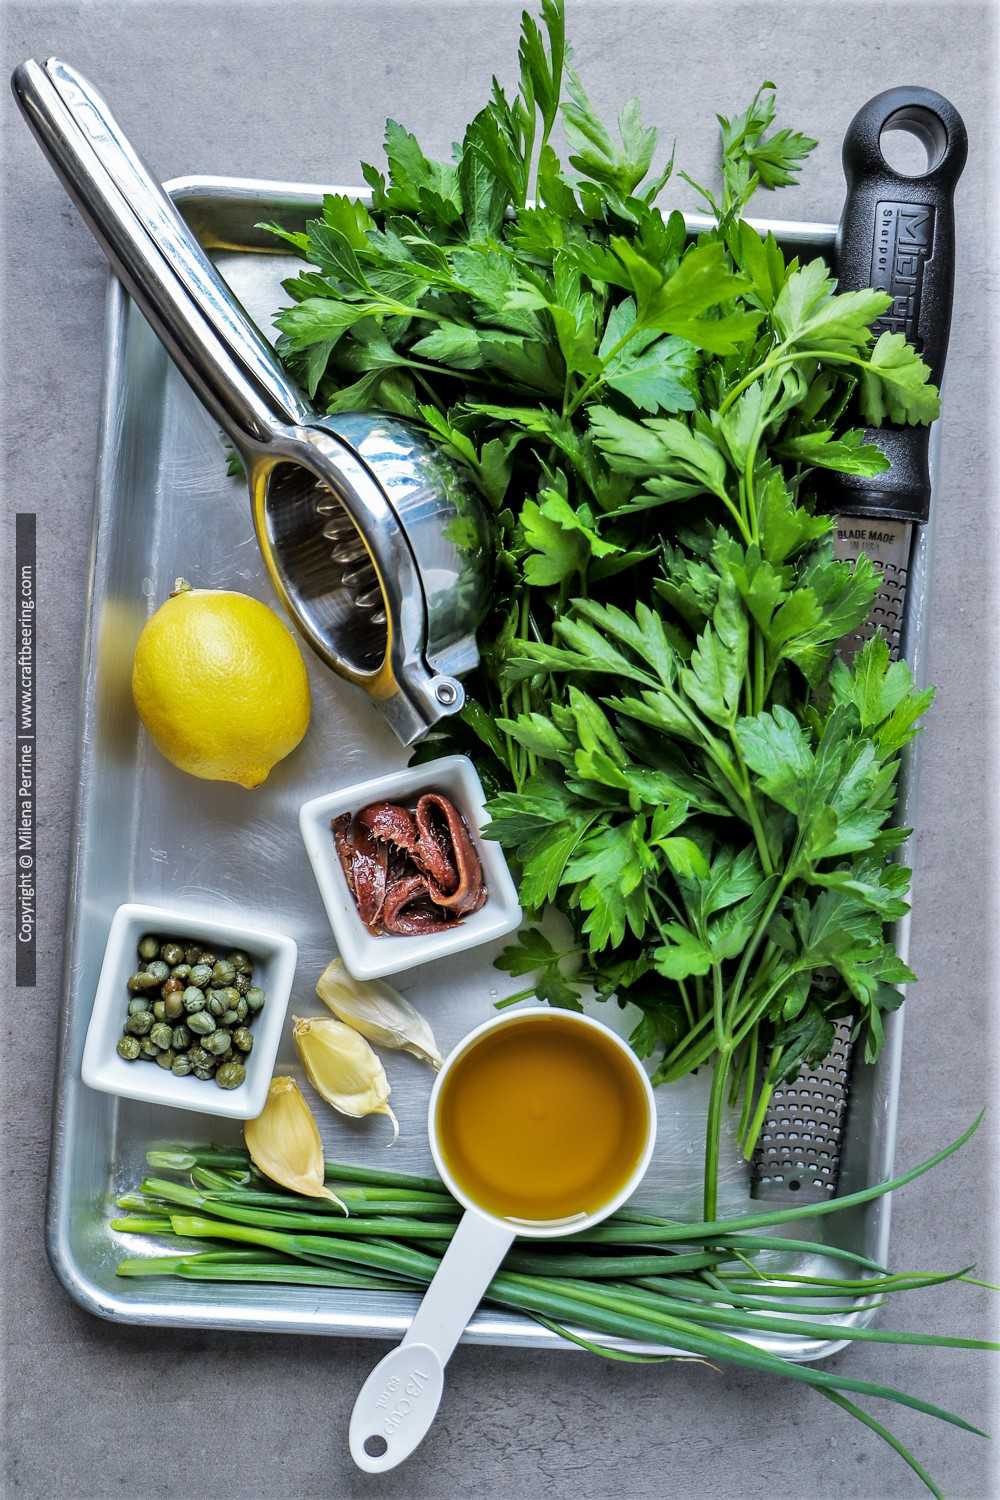 Fresh parsley and other ingredients for persillade